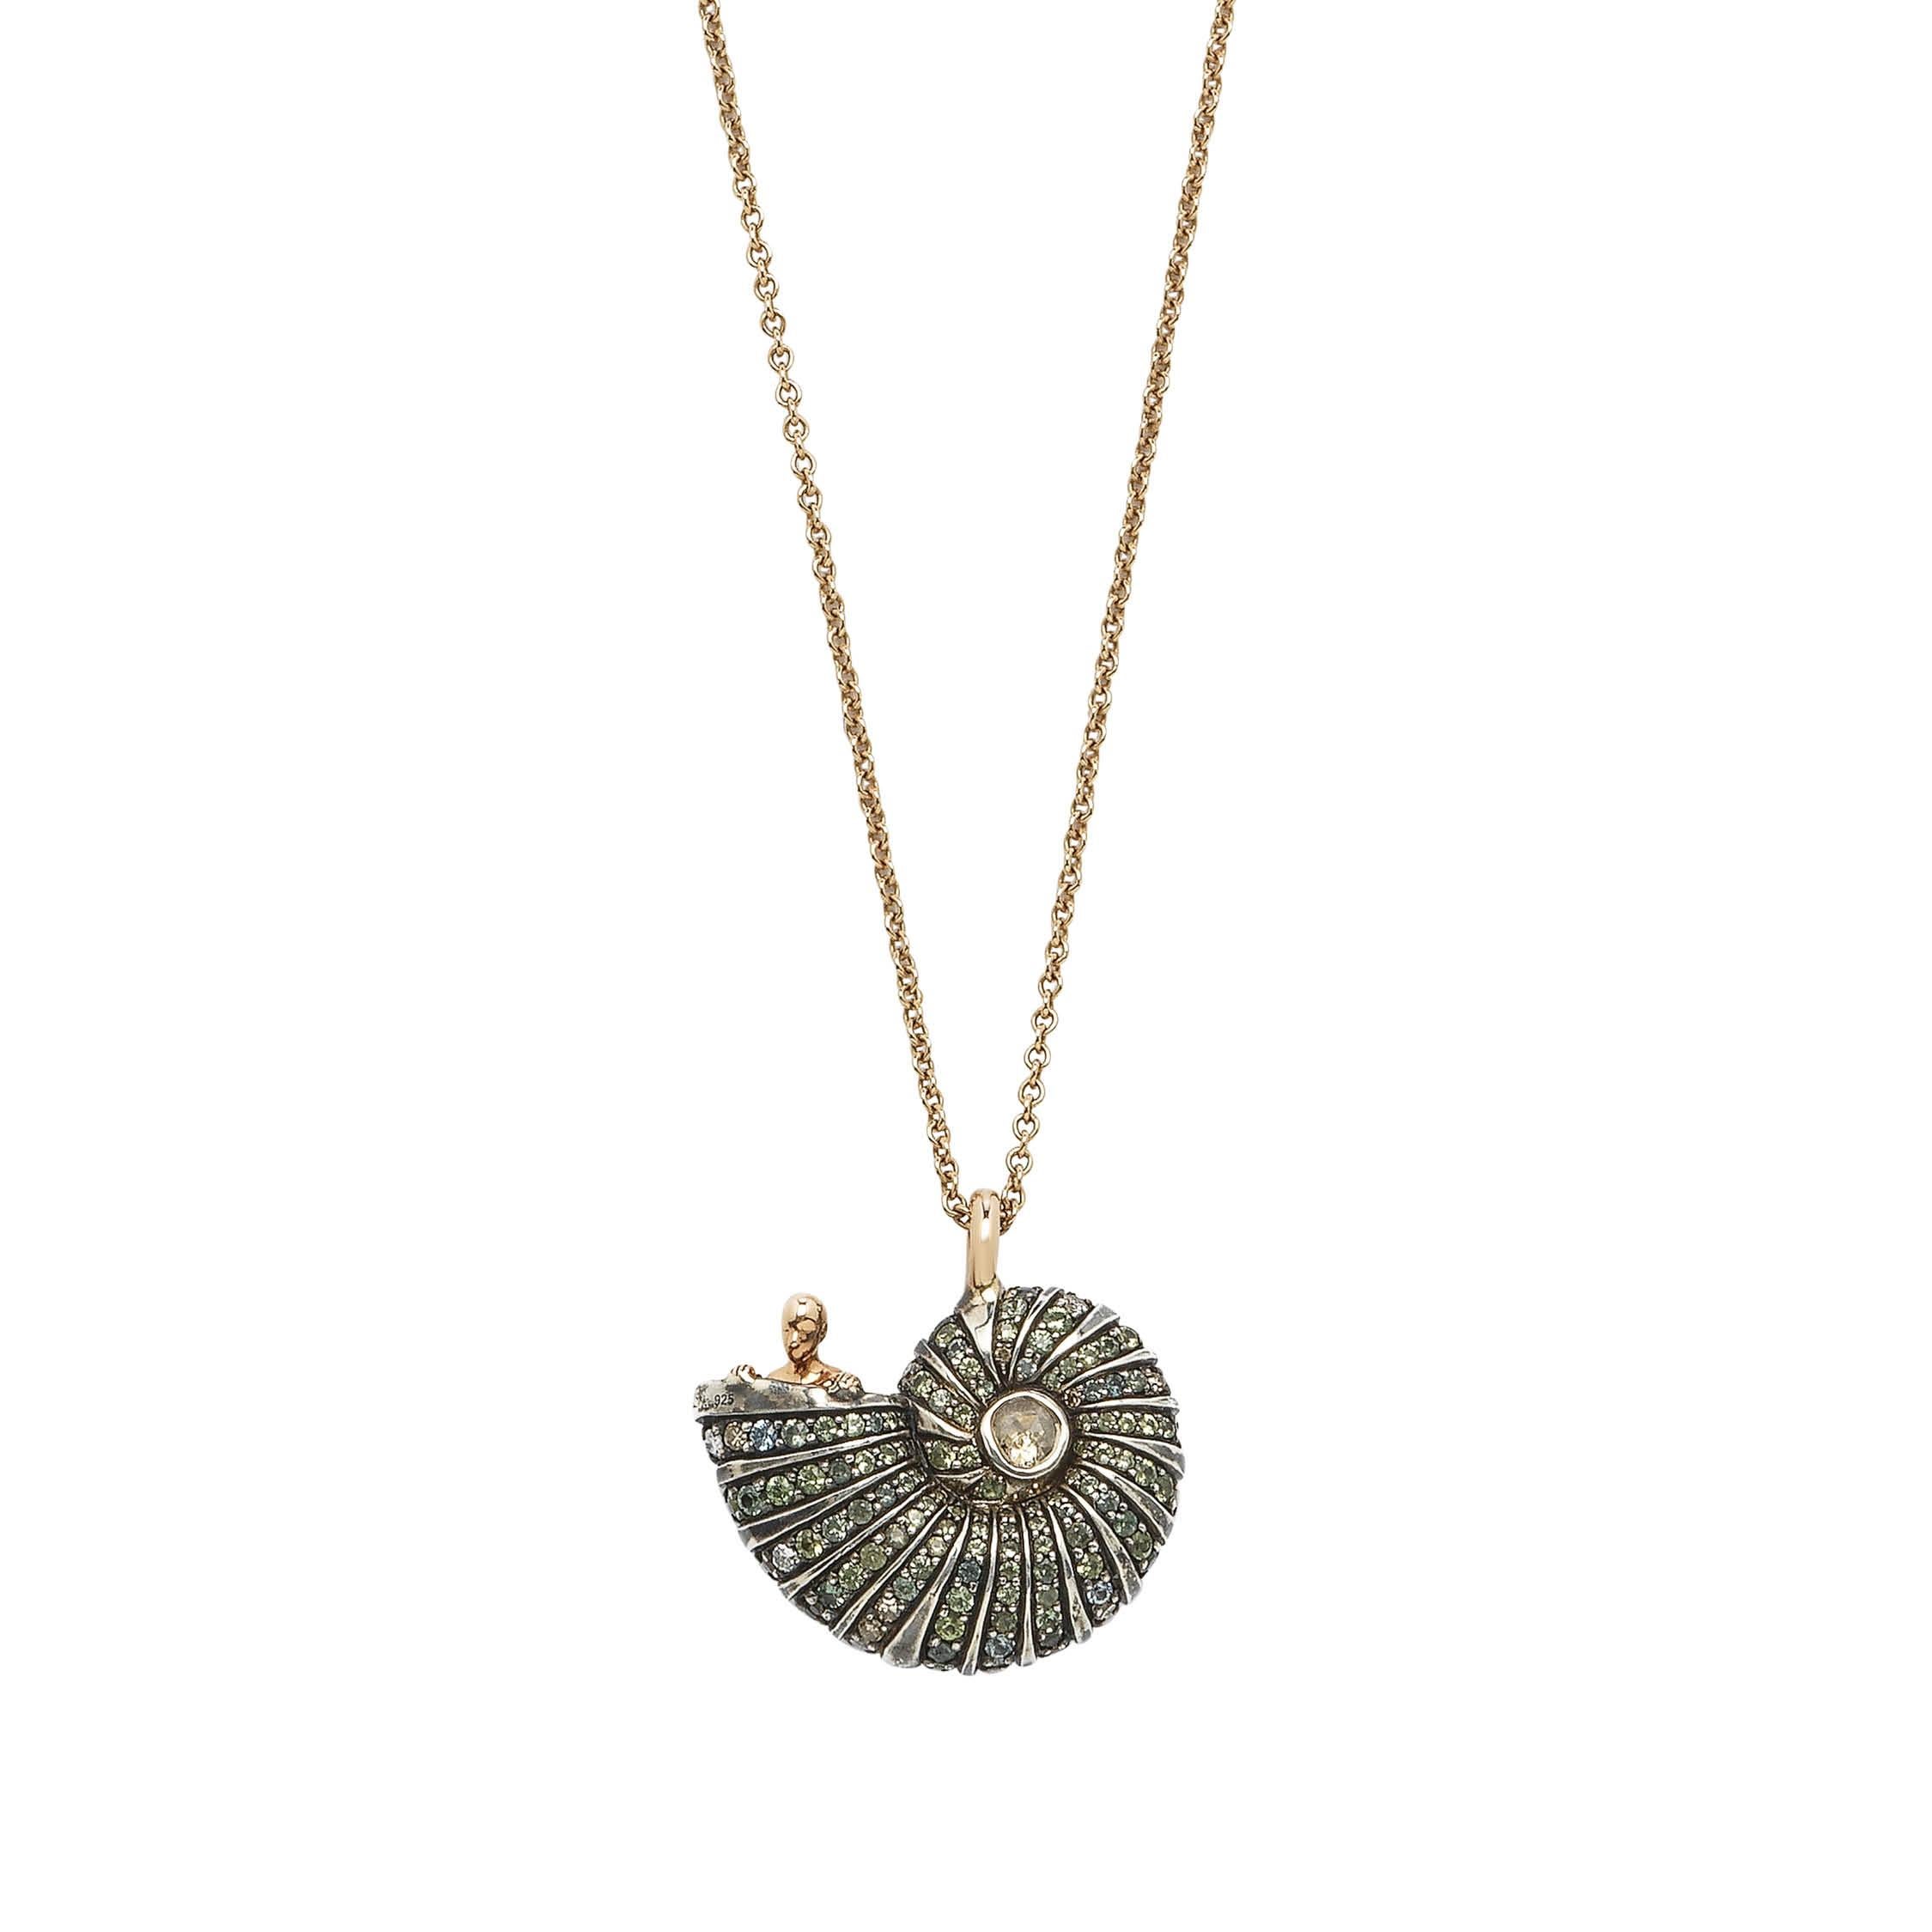 This pendant necklace is fashioned in 18k rose gold and sterling silver as a pretty shell, out of which emerges an 18k rose gold human figure, inspired by Hieronymus Bosch’s fantastical paintings. The shell is embellished with blue and green